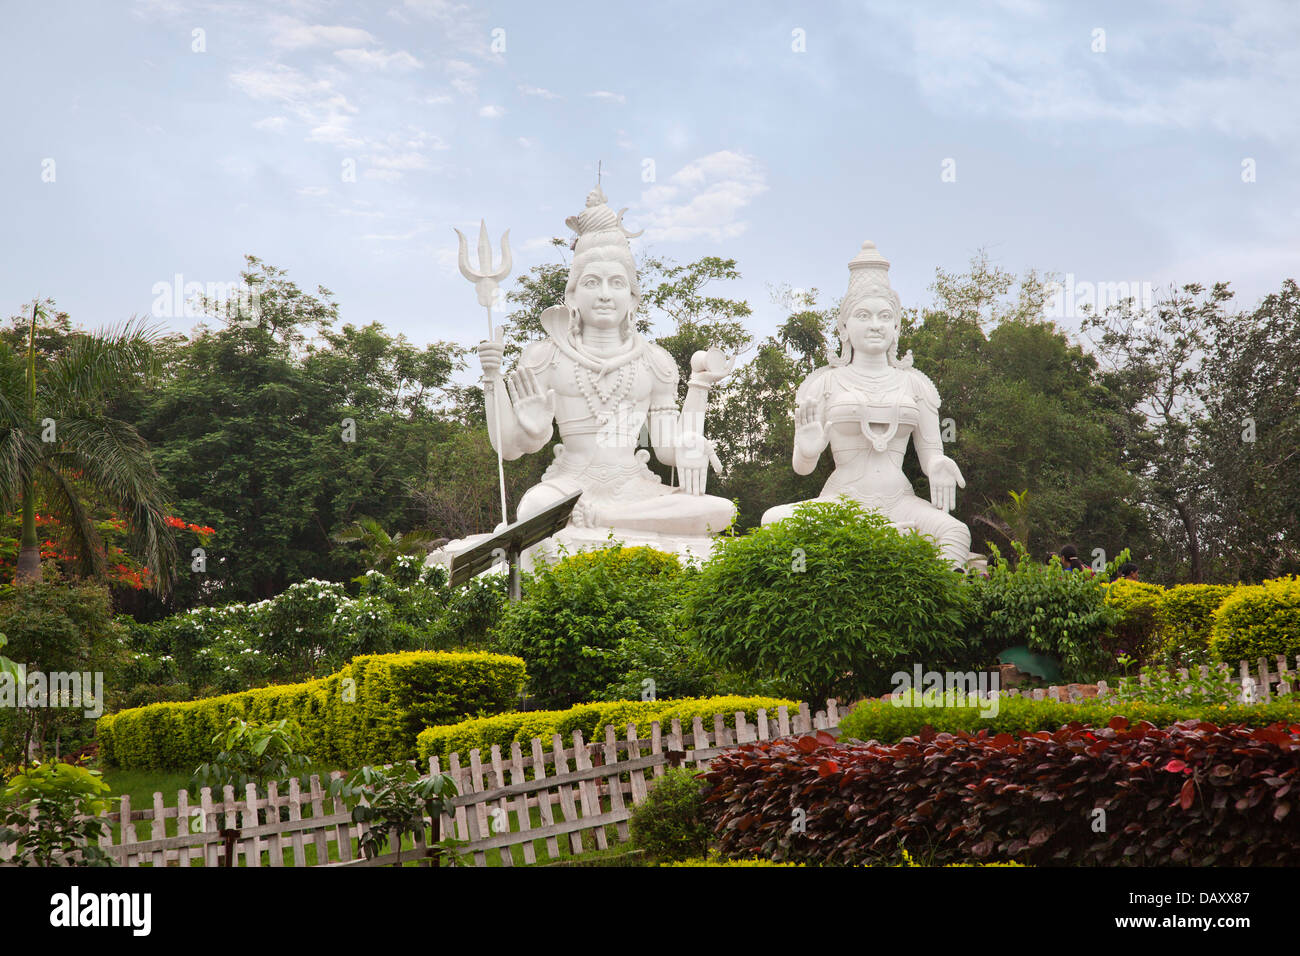 Statues of Lord Shiva and Goddess Parvathi in a park, Kailasagiri ...